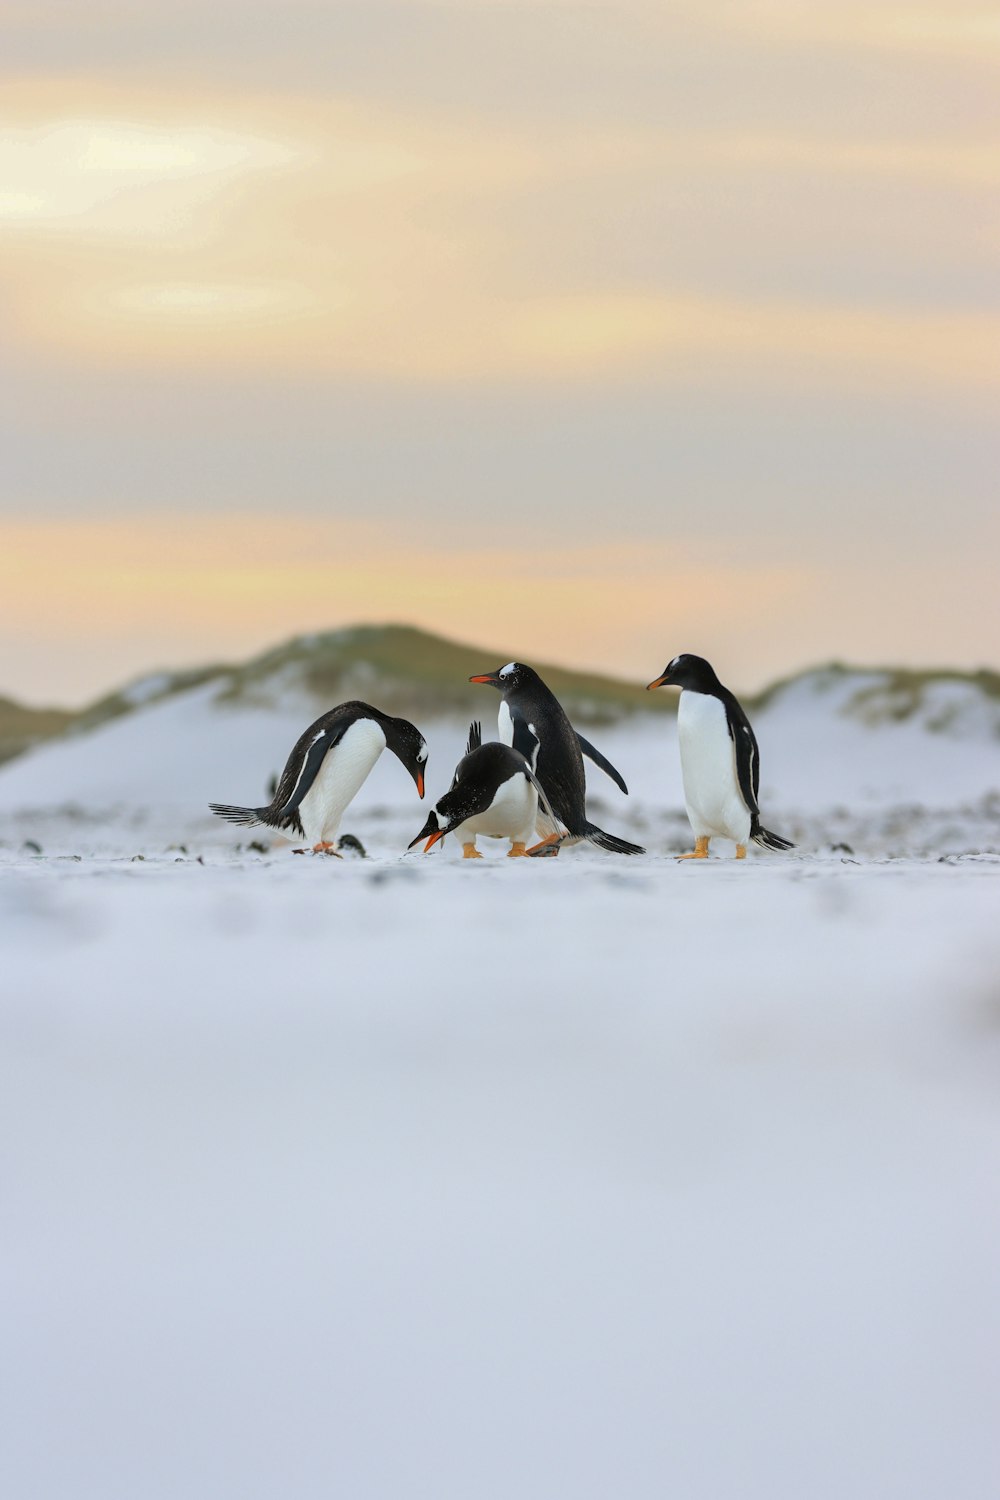 a group of penguins walking across a snow covered field